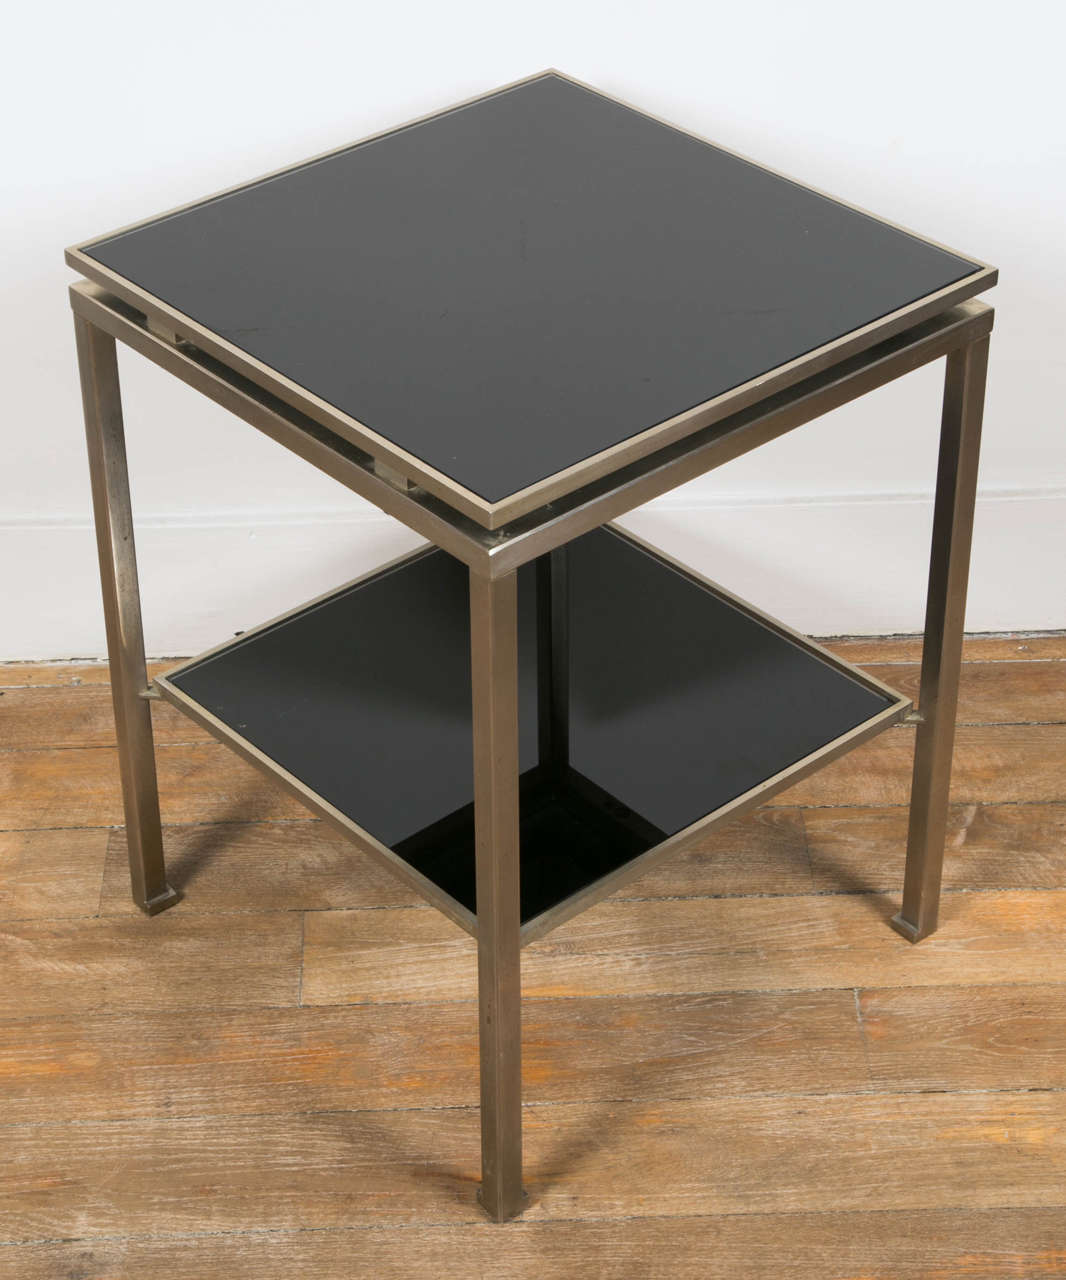 Mid-20th Century Pair of Two Tier Steel Tables by Guy Lefevre